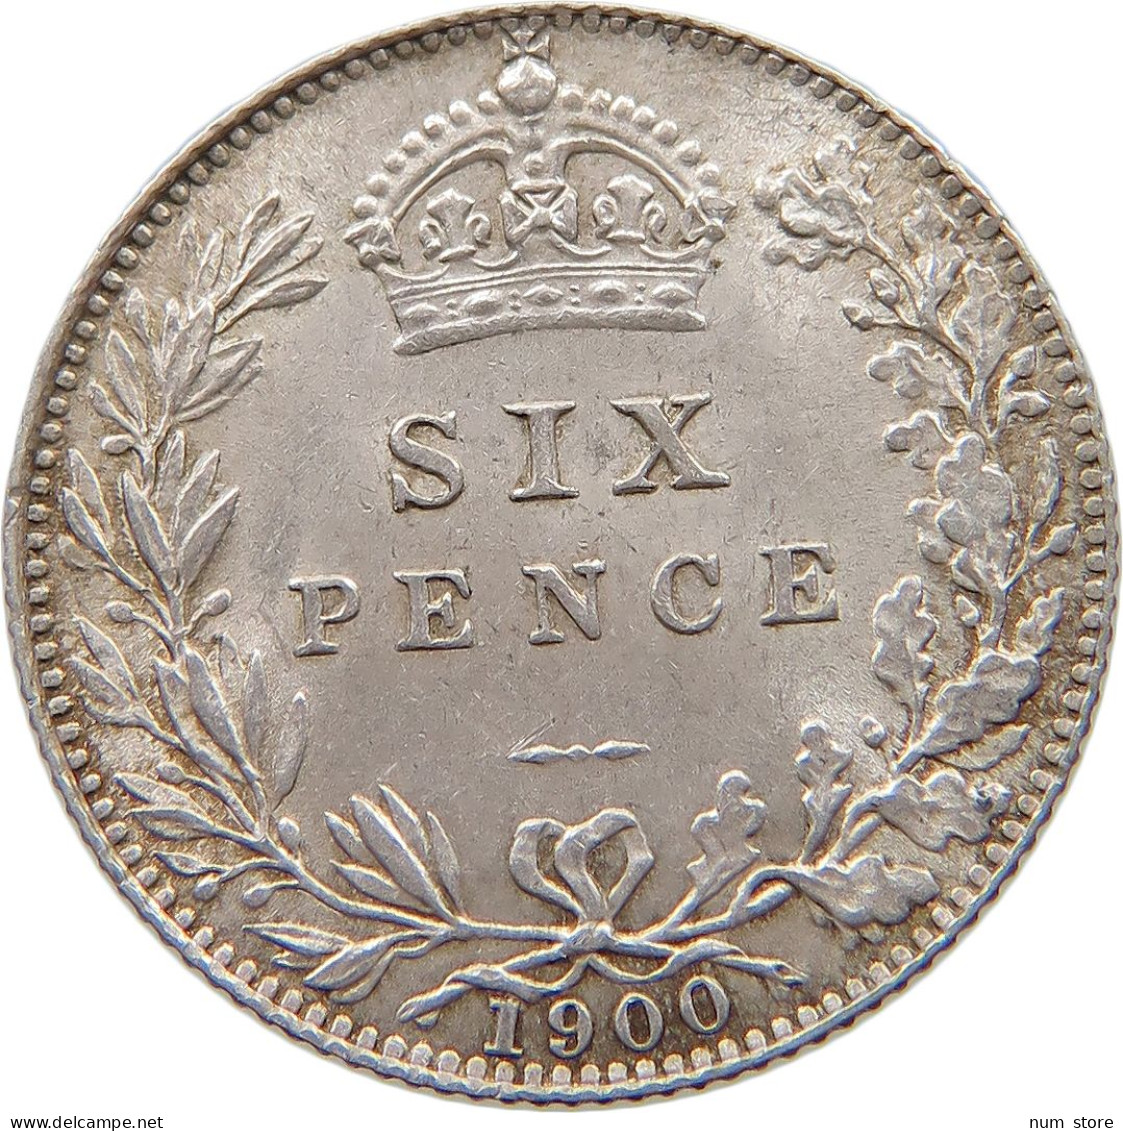 GREAT BRITAIN SIXPENCE 1900 Victoria 1837-1901 #t115 0405 - H. 6 Pence